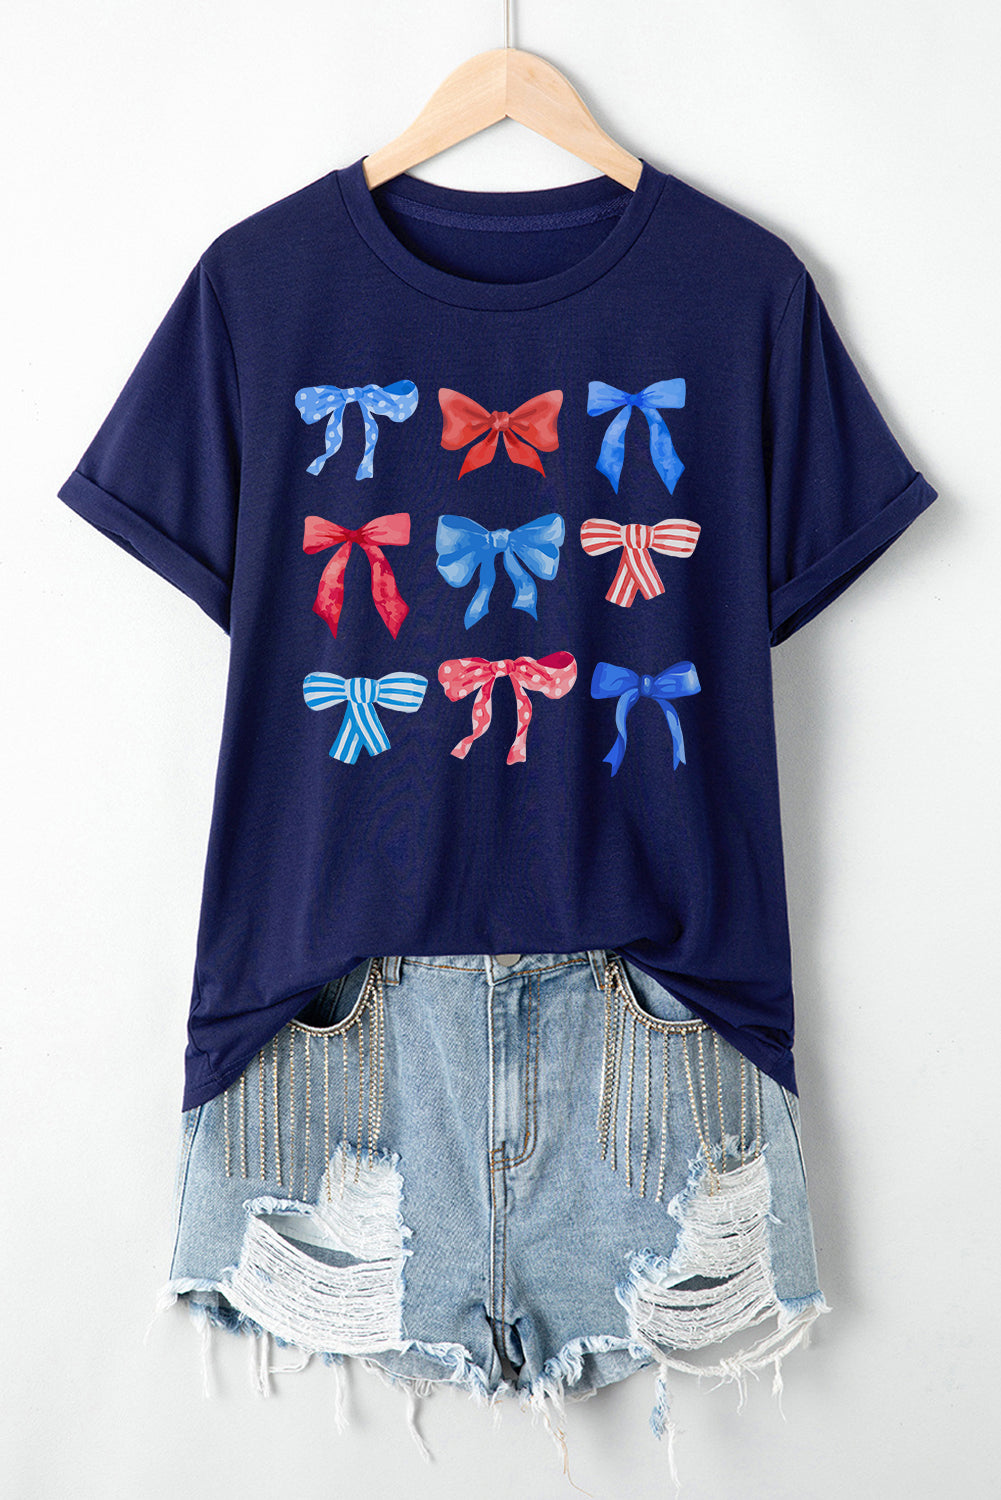 Blue Diverse Bowknot Print Independent Day Graphic Tee Graphic Tees JT's Designer Fashion